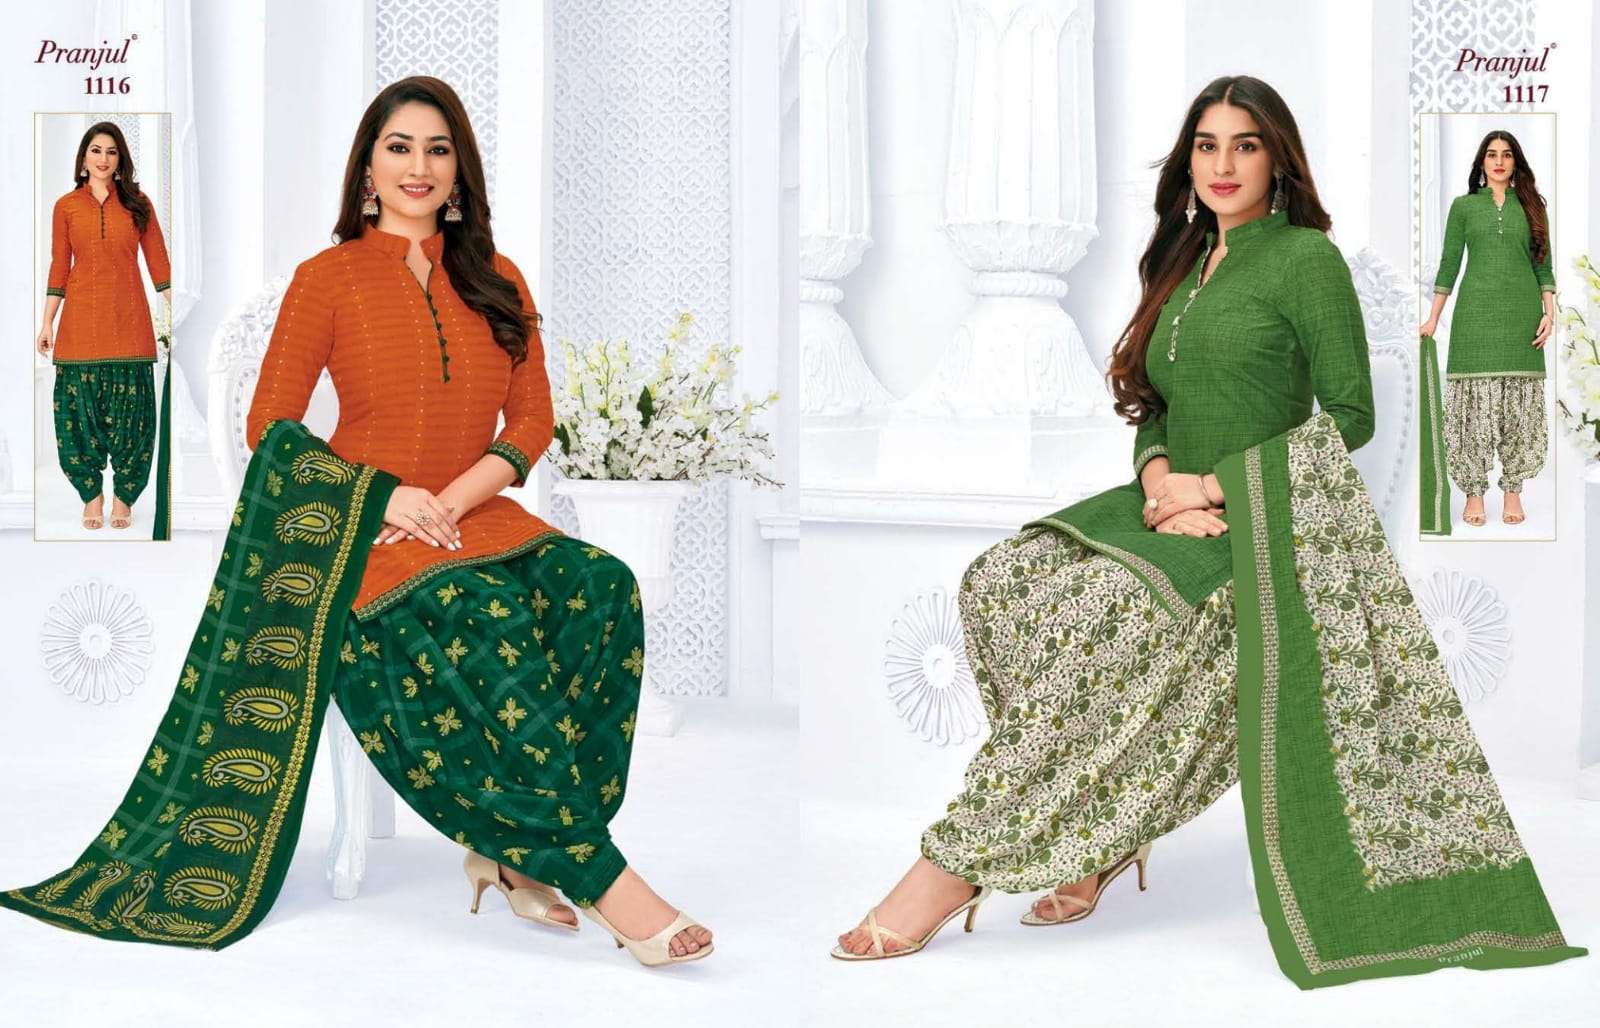 PRIYANKA VOL-11 BY PRANJUL 1101 TO 1136 SERIES BEAUTIFUL SUITS STYLISH FANCY COLORFUL CASUAL WEAR & ETHNIC WEAR PURE COTTON PRINTED DRESSES AT WHOLESALE PRICE